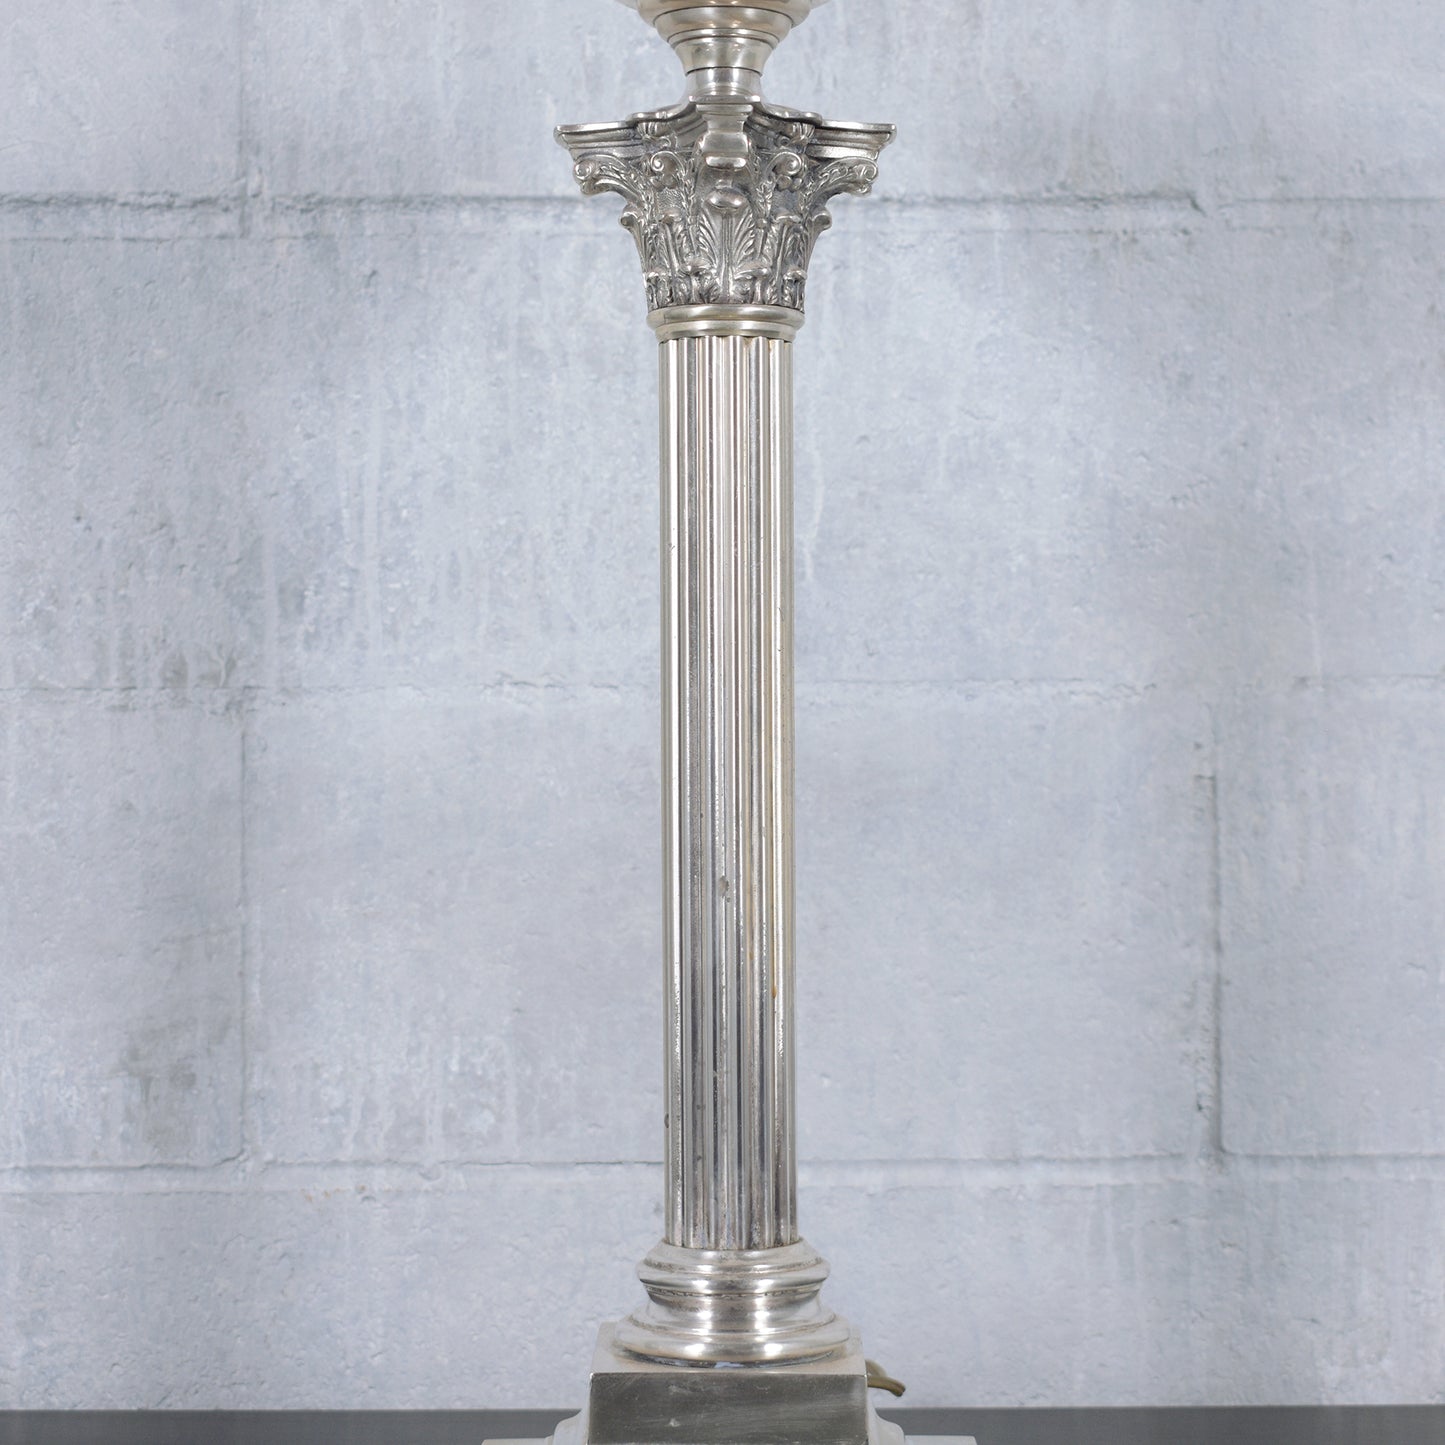 Restored Vintage Regency-Style Lamp Table with Silver Finish and Glass Urn